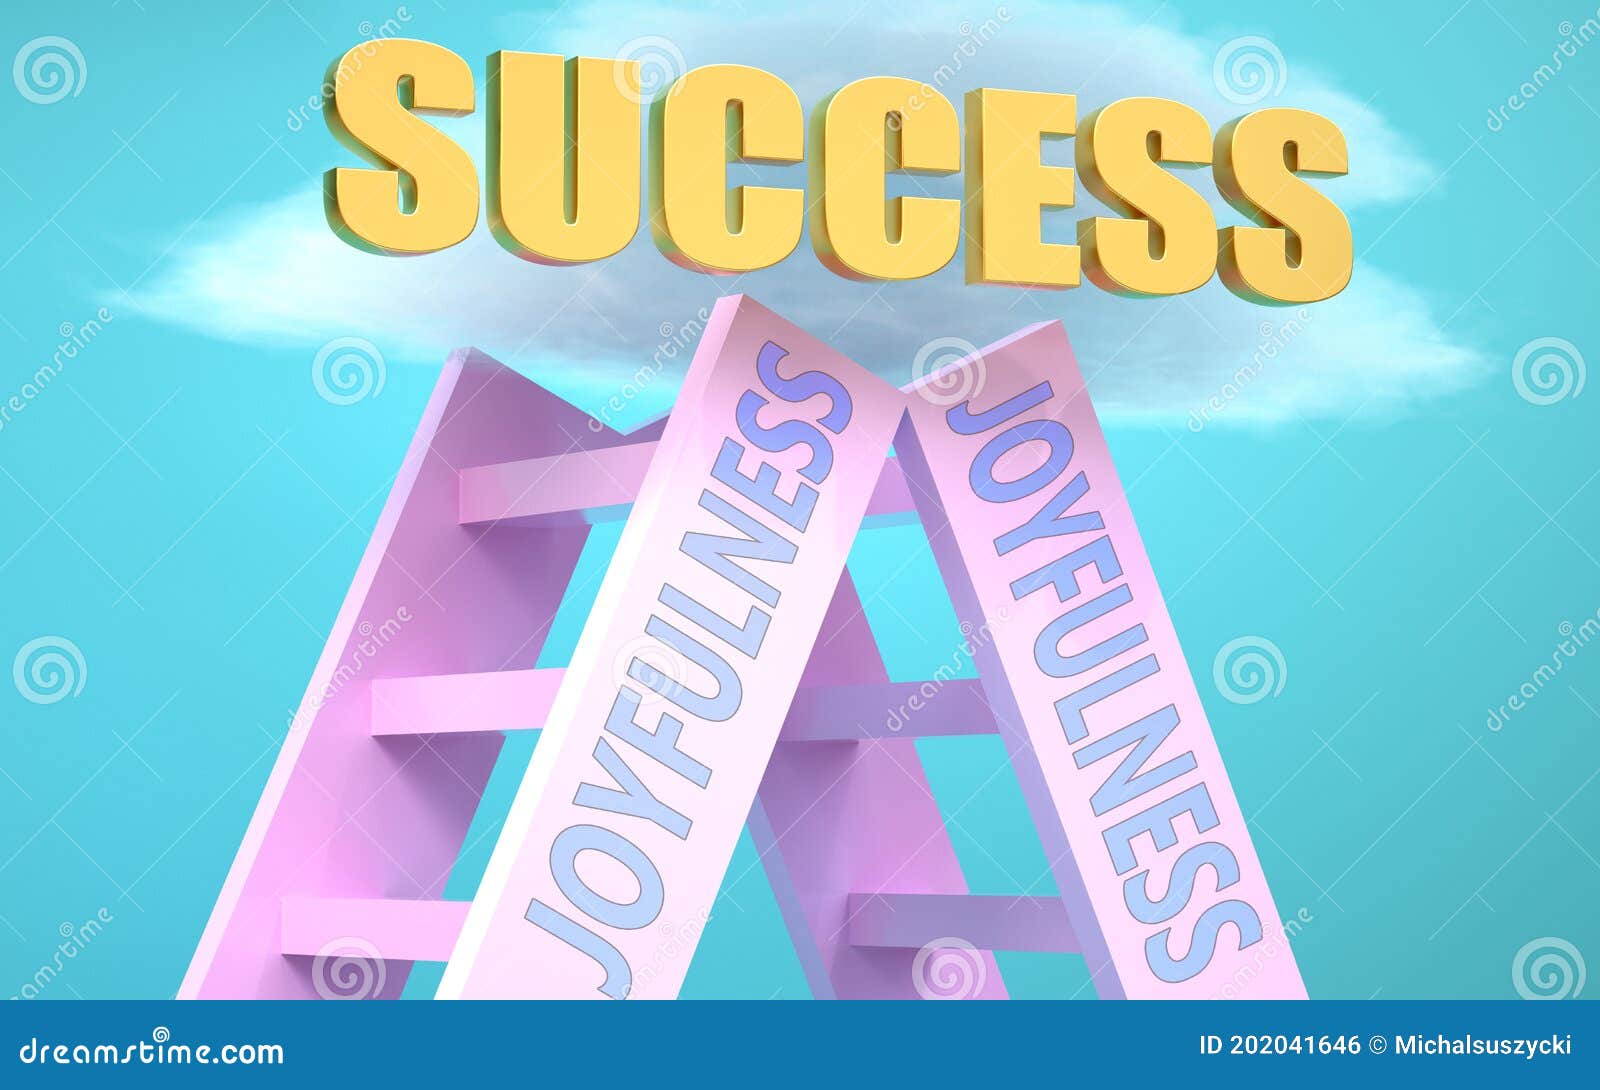 joyfulness ladder that leads to success high in the sky, to ize that joyfulness is a very important factor in reaching